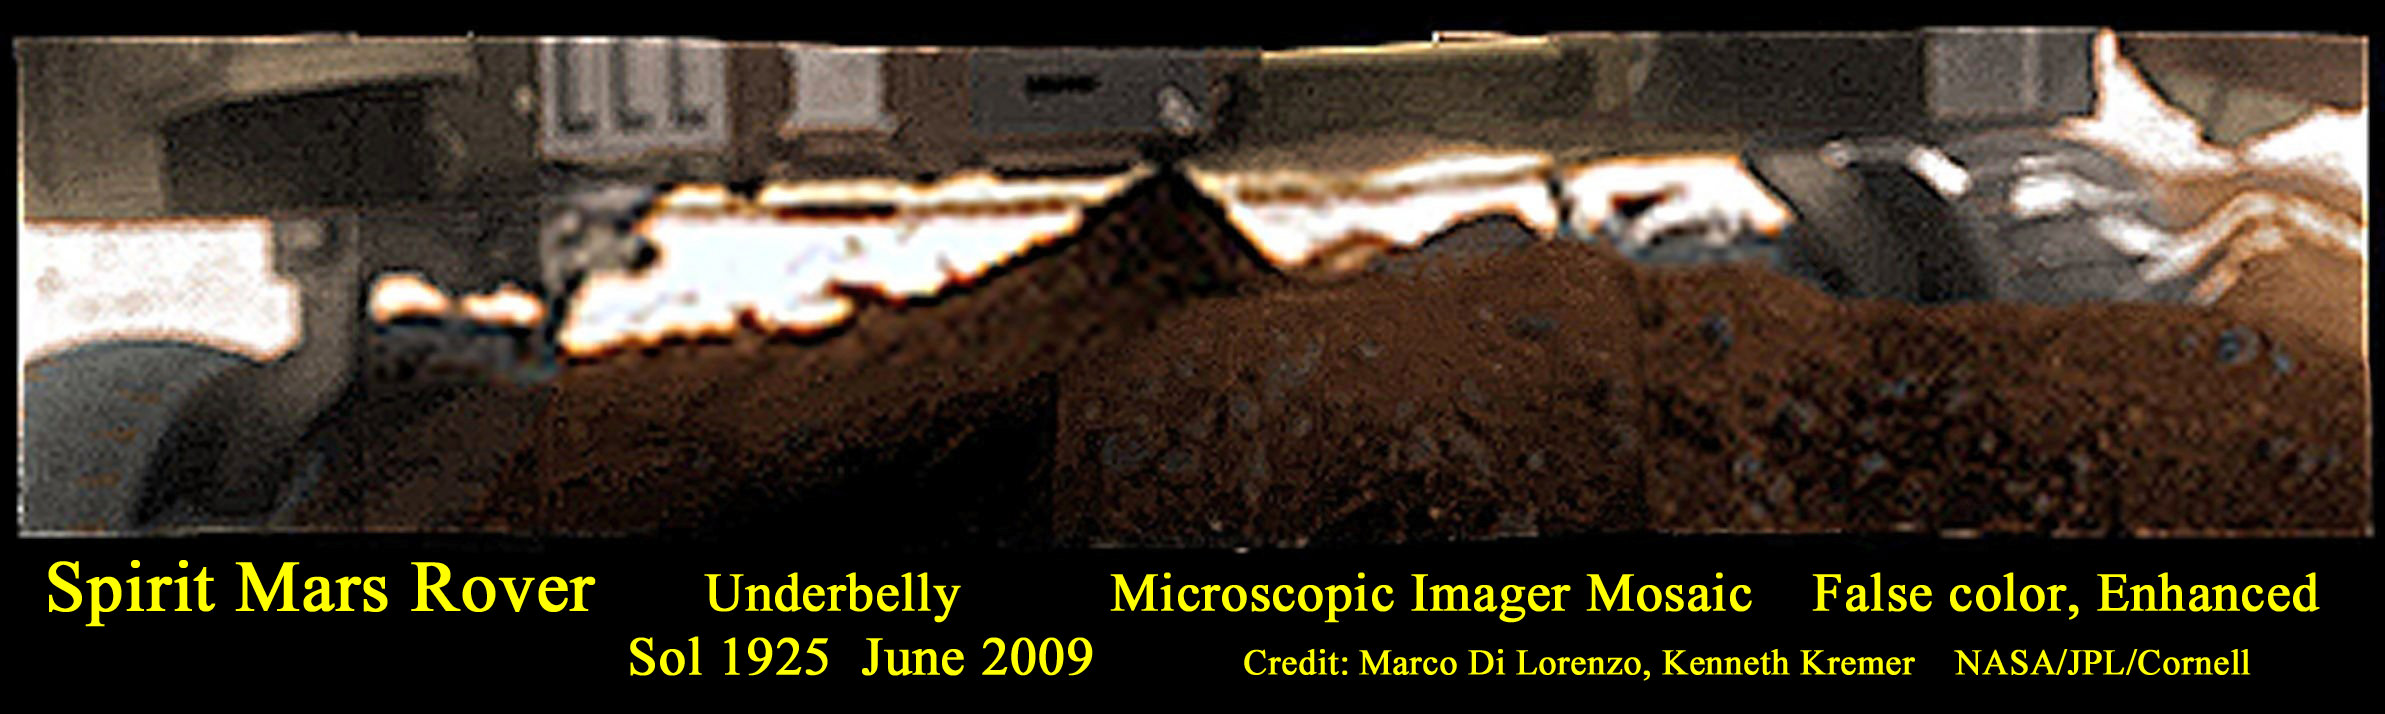 Mosaic of microscopic images of Spirit’s underbelly on Sol 1925 in June 2009.  Mosaic shows predicament of being stuck at Troy with wheels buried in the sulfate-rich Martian soil.  This false color mosaic has been enhanced and stretched to bring out additional details about the surrounding terrain and embedded wheels and distinctly shows a pointy rock perhaps in contact with the underbelly.   Mosaic Credit: Marco Di Lorenzo/ Kenneth Kremer/NASA/JPL/Cornell